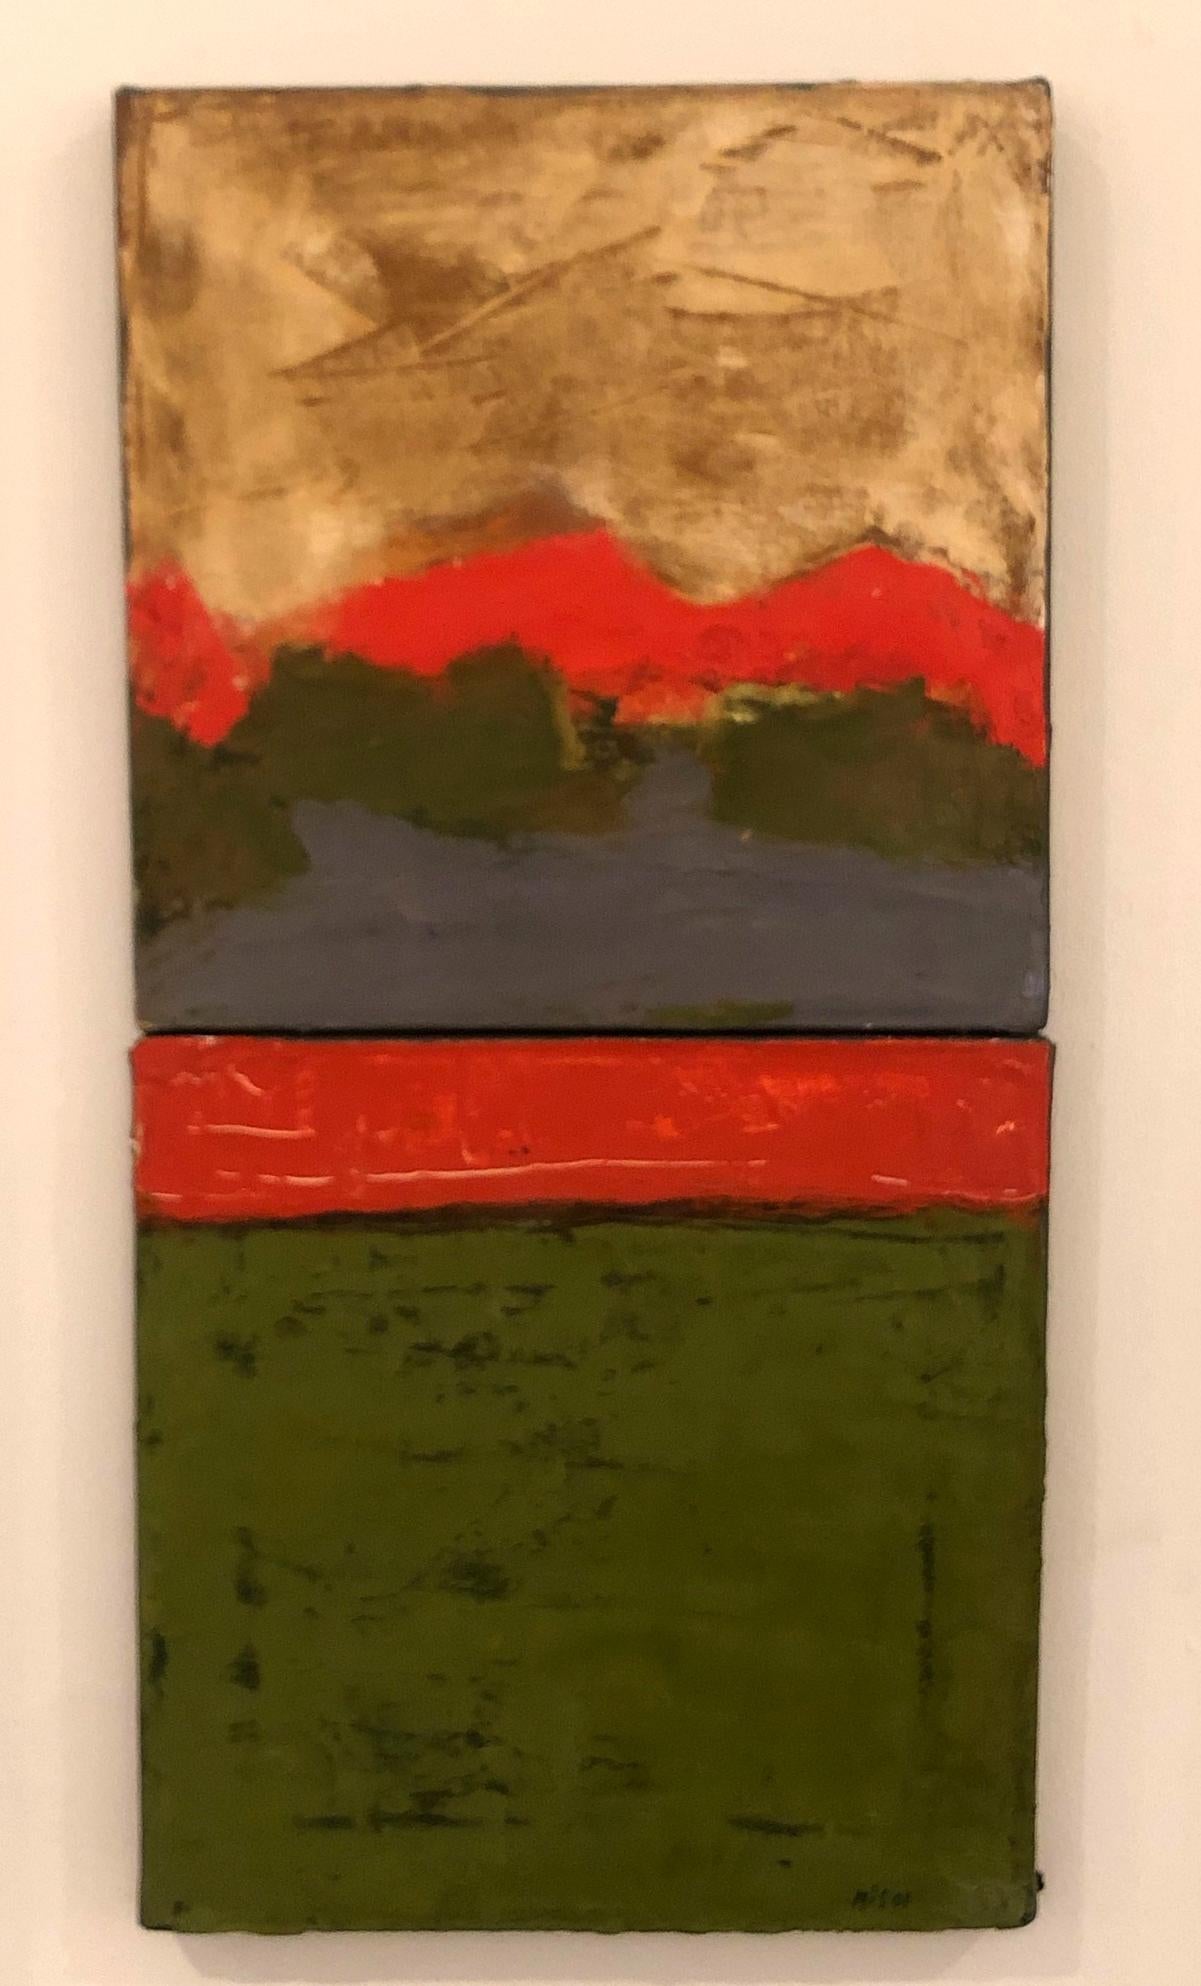 Abstract landscape painting in green, red, and brown. 
Signed and dated bottom right corner. 

Russell Sharon was born on a farm in Minnesota. He studied in Mexico City, Boston and New York. He is known for his wildly colorful works with imagery